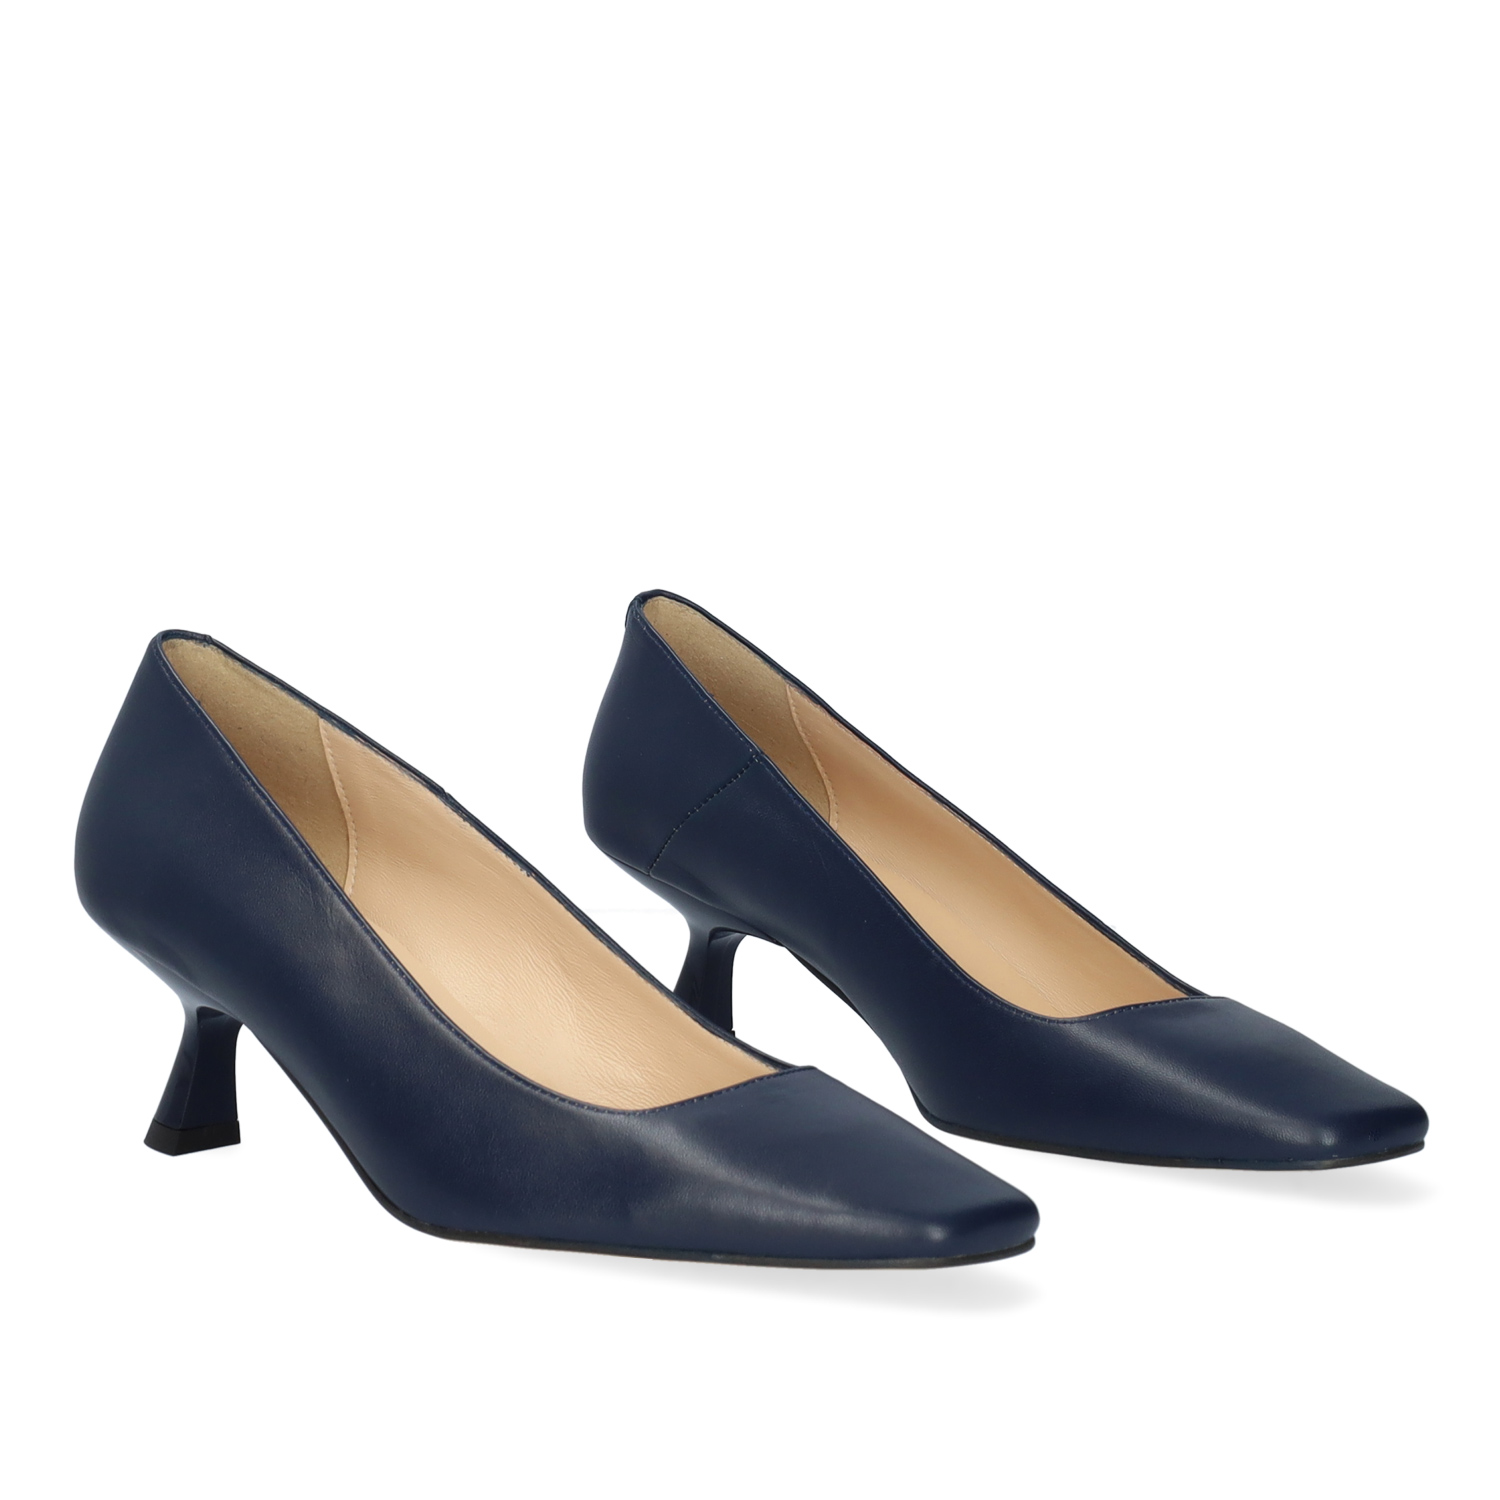 Heeled shoes in navy leather 